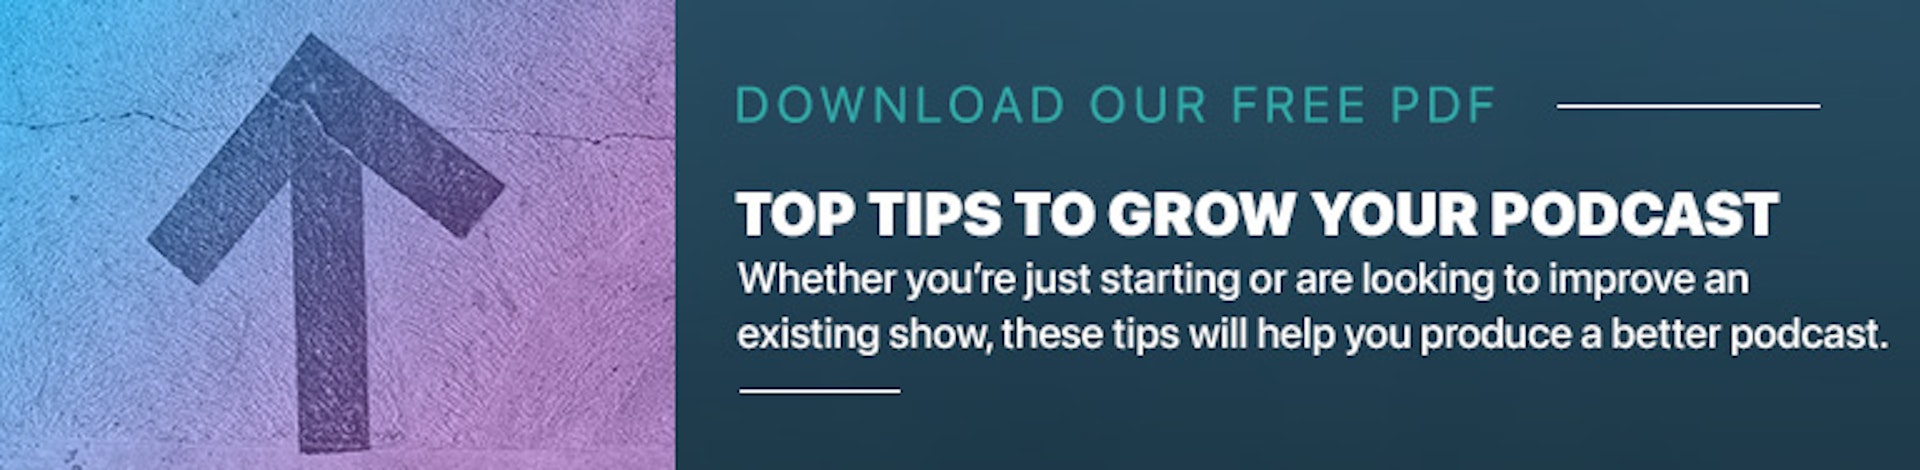 Download the Top Tips To Grow Your Podcast PDF from The Podcast Consultant.